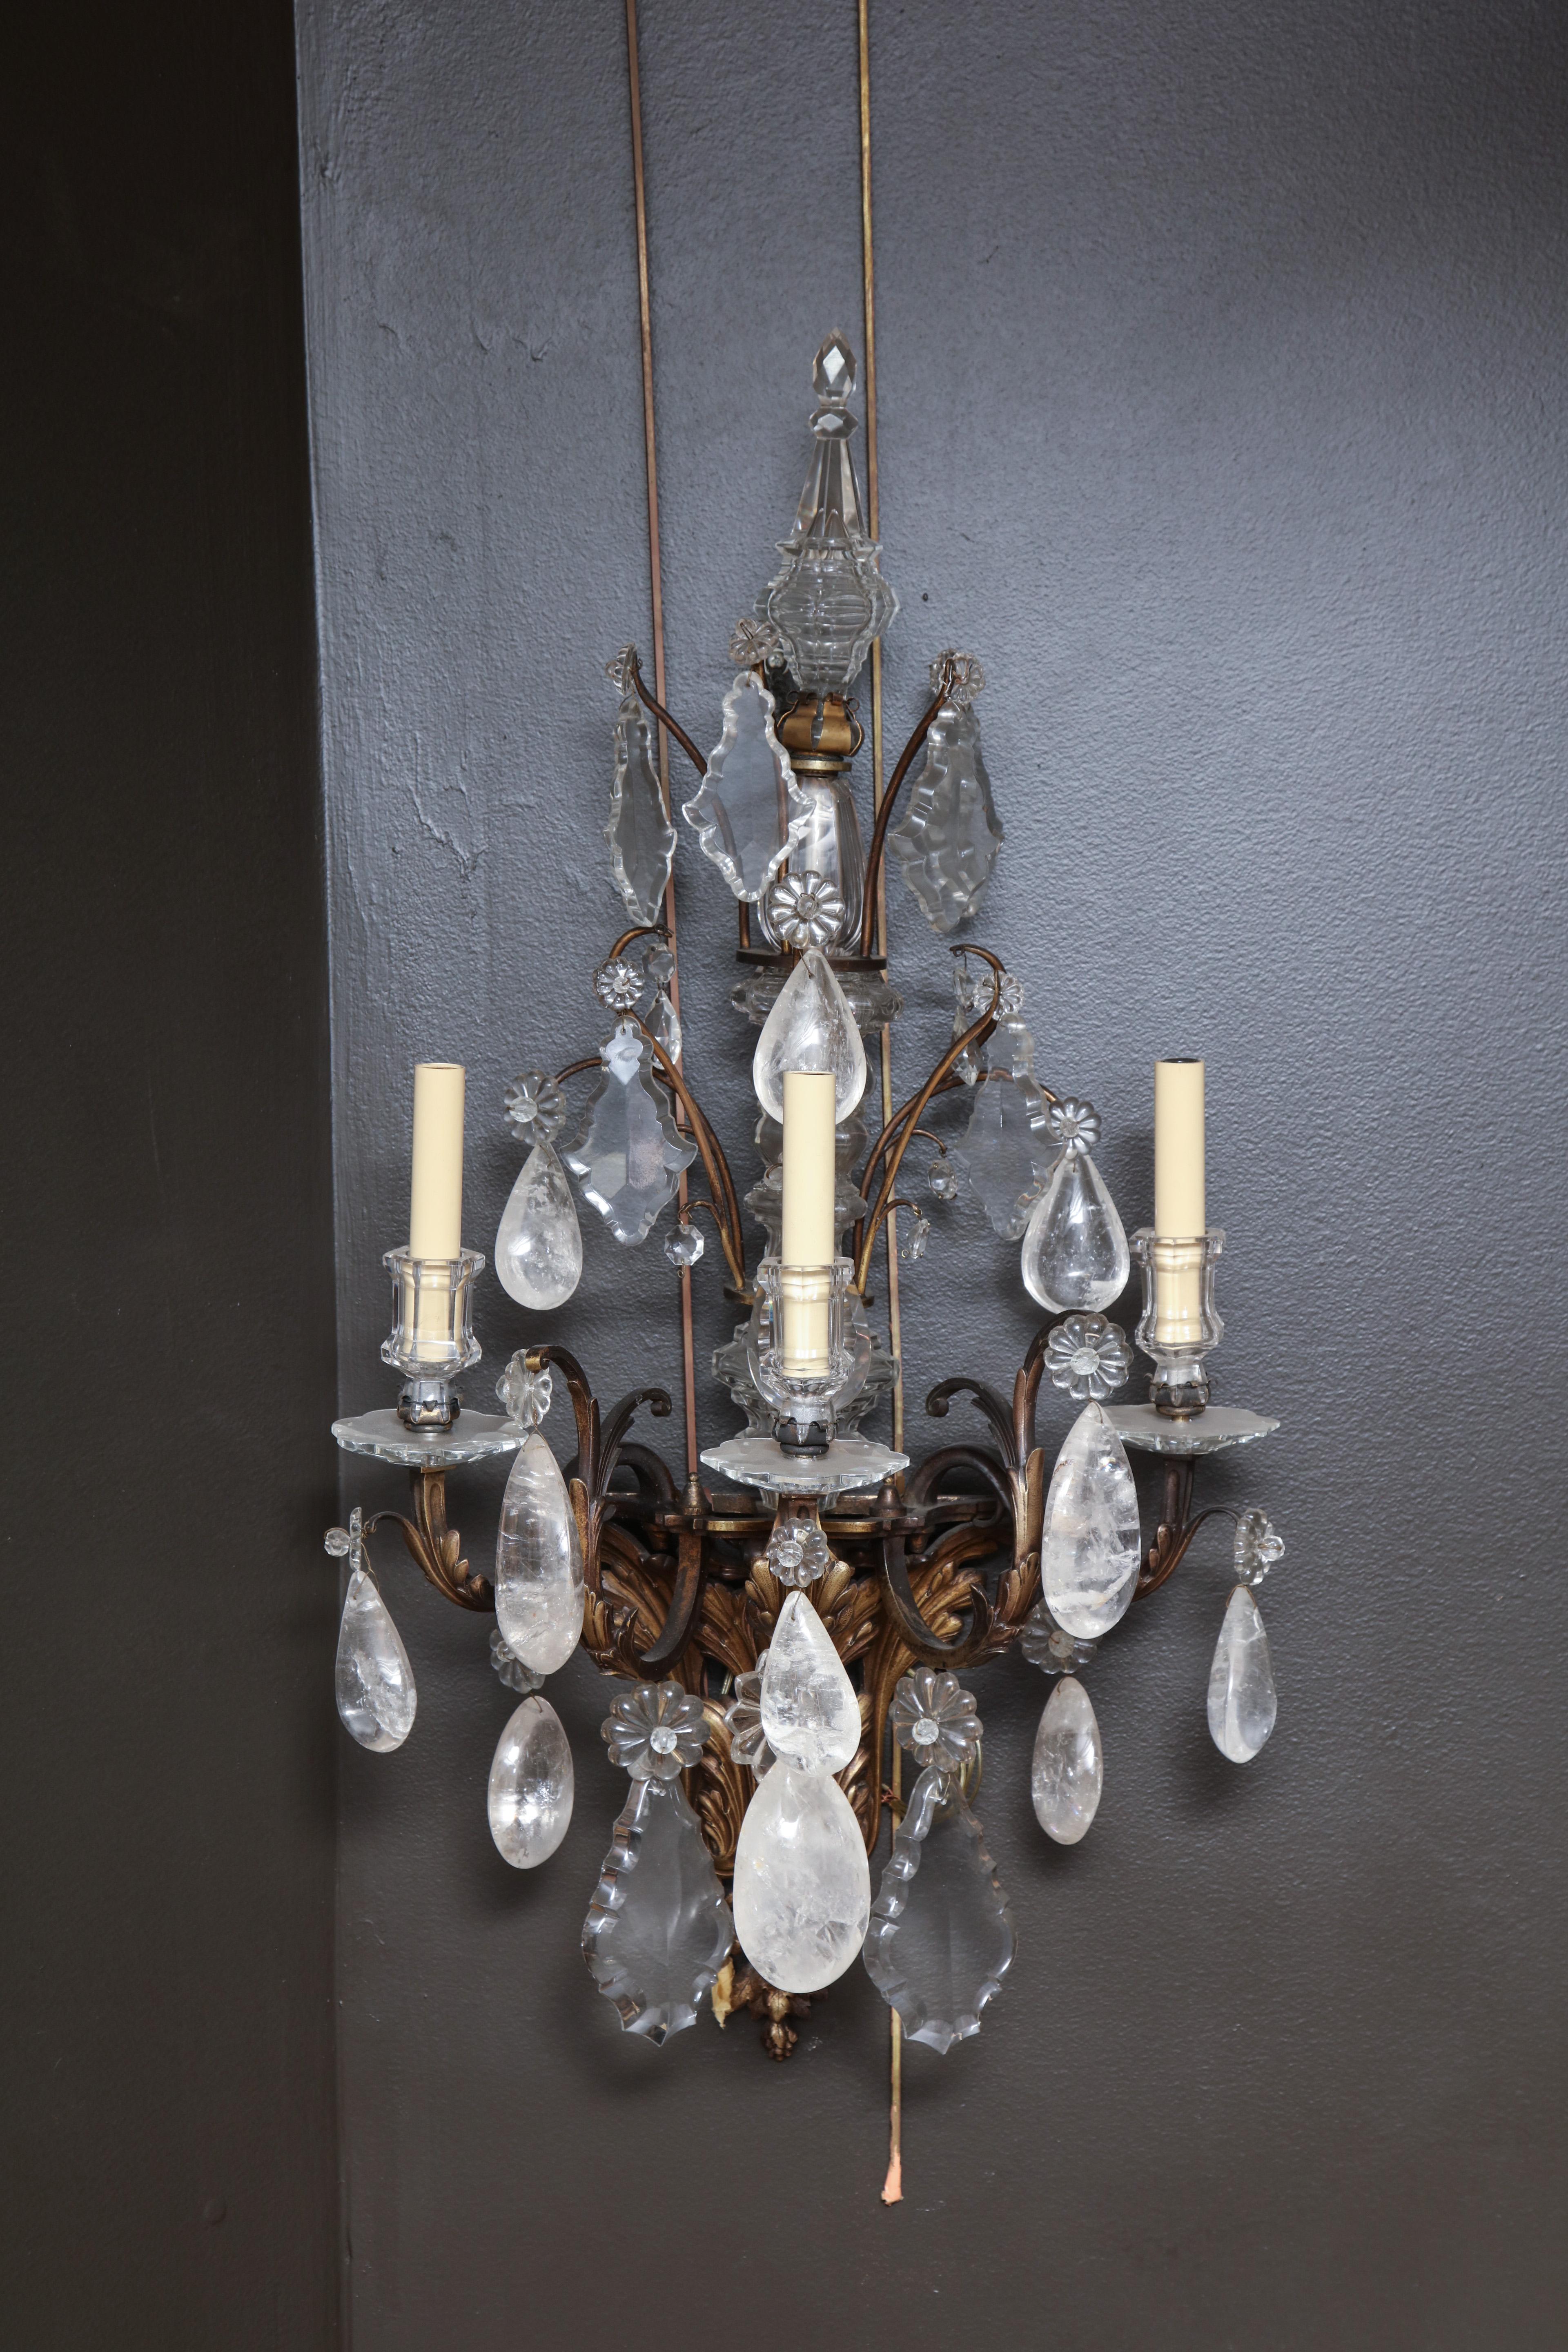 A fine and large pair of 19th century French Regency bronze, crystal and rock crystal three-light wall appliques or sconces.